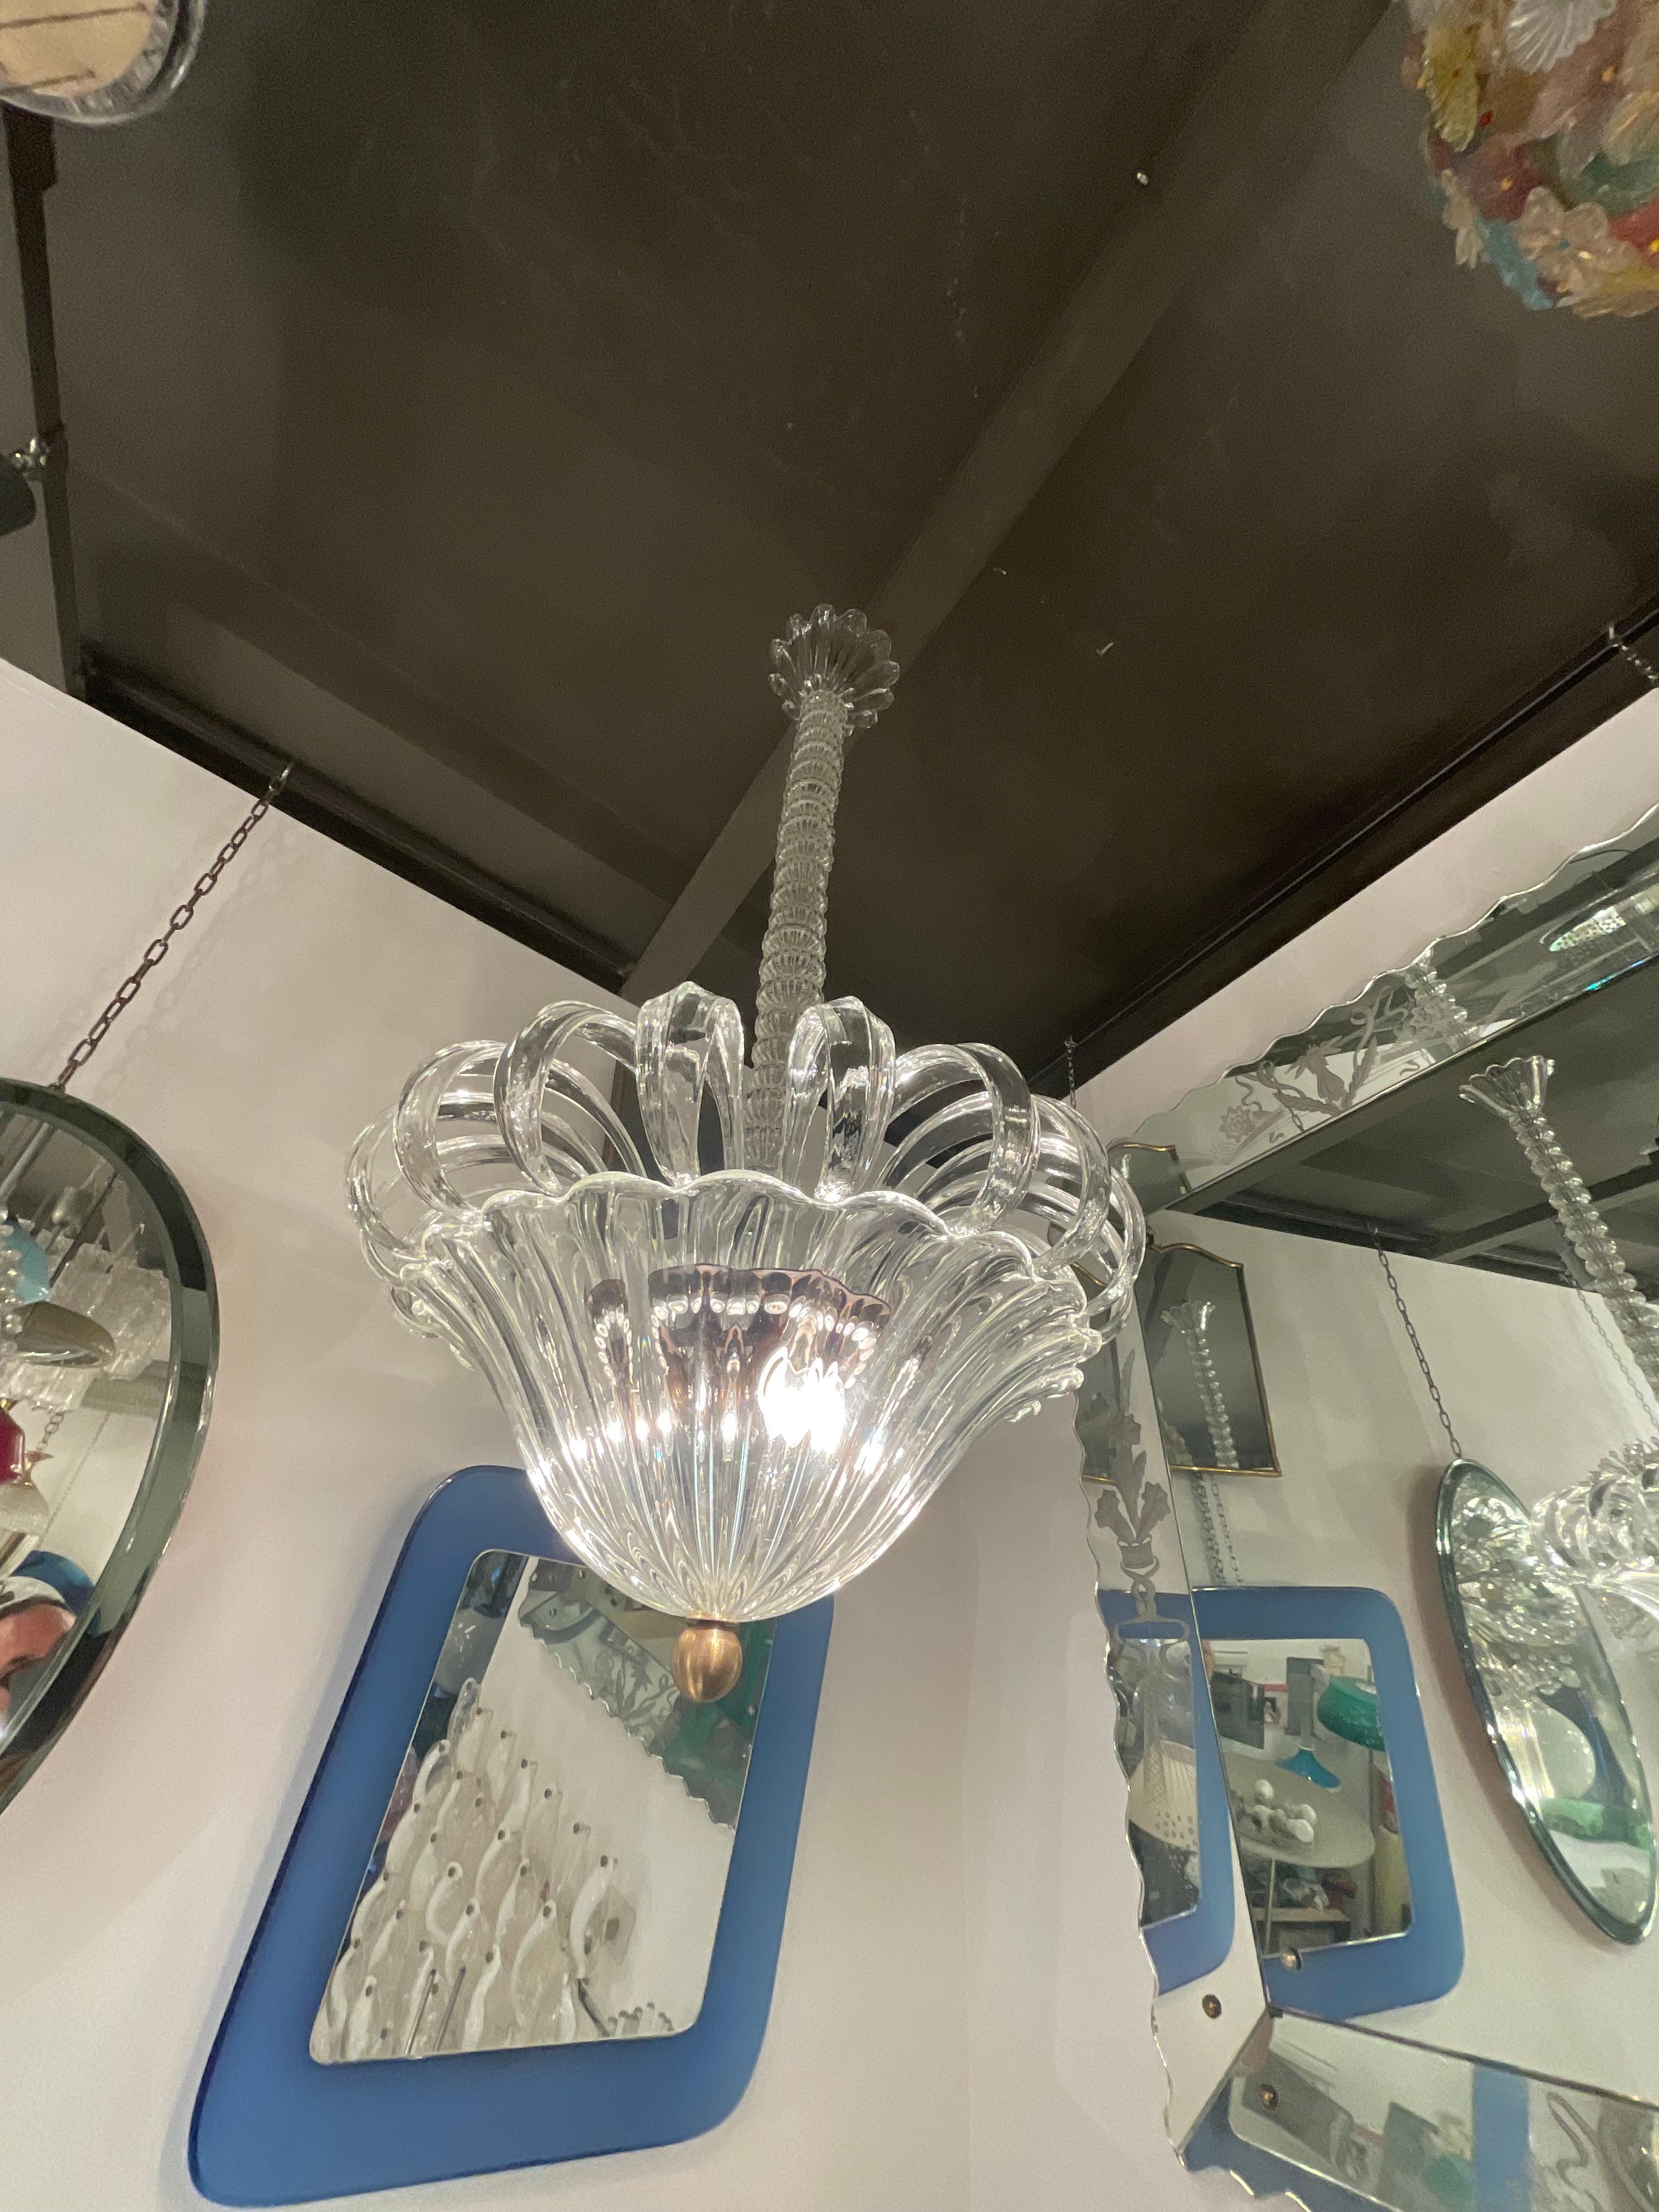 Original chandelier from the SEGUSO glassworks 
A very light and elegant line to fit perfectly into both modern and antique decor.
Perfect condition of conservation.